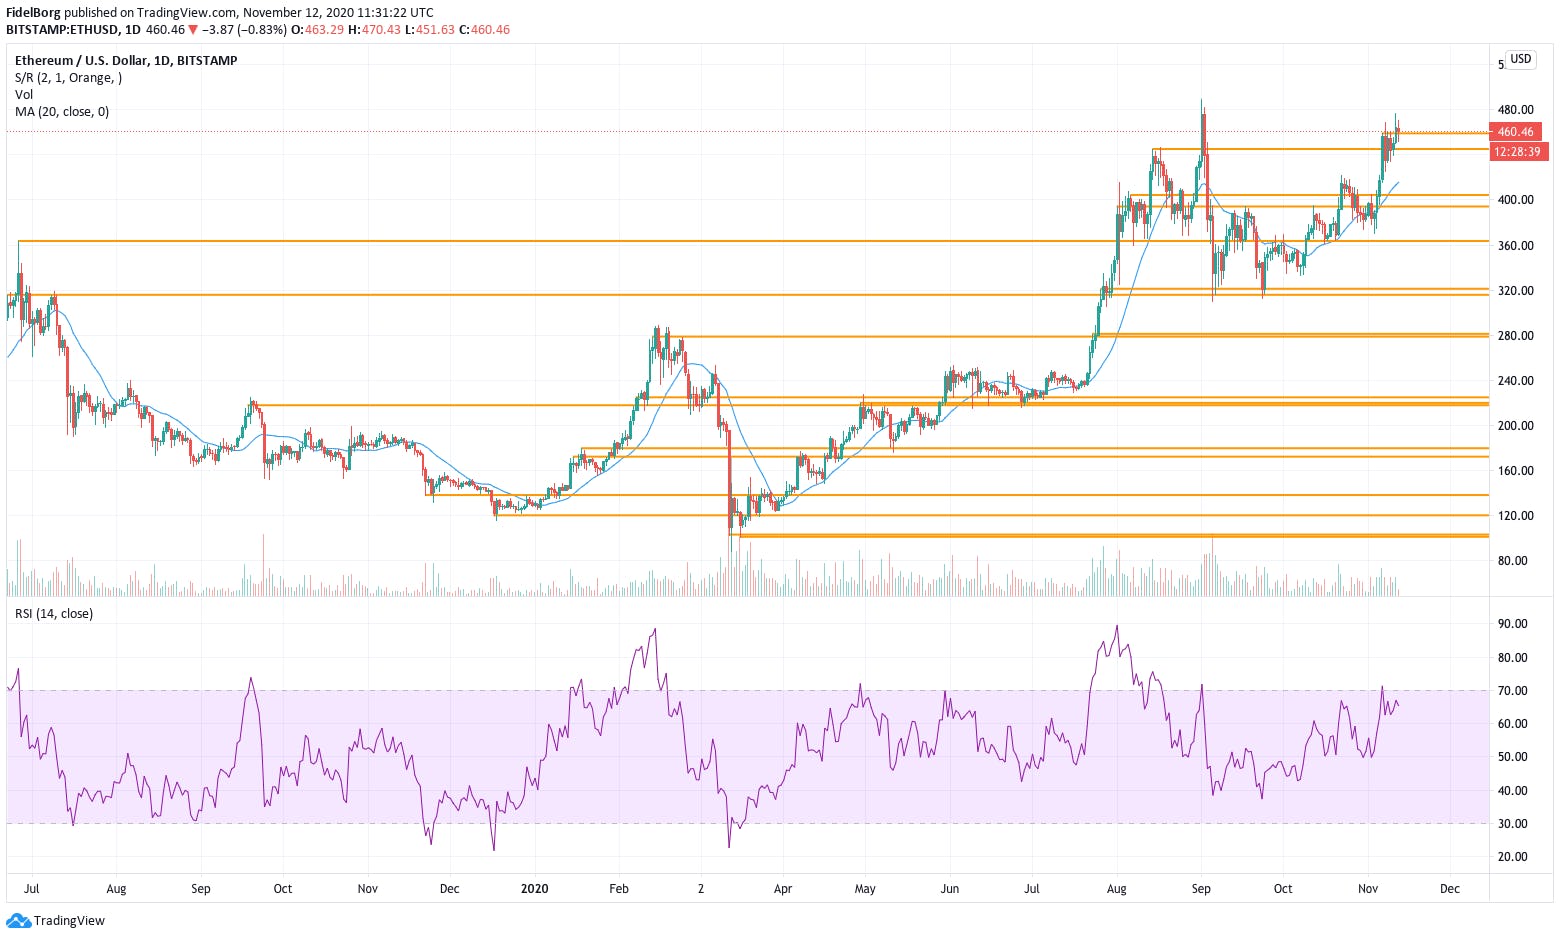 ETH/USD (daily): RSI(14), 20 days moving average, RSI(14), volume and support/resistance bands (Source: tradingview.com)